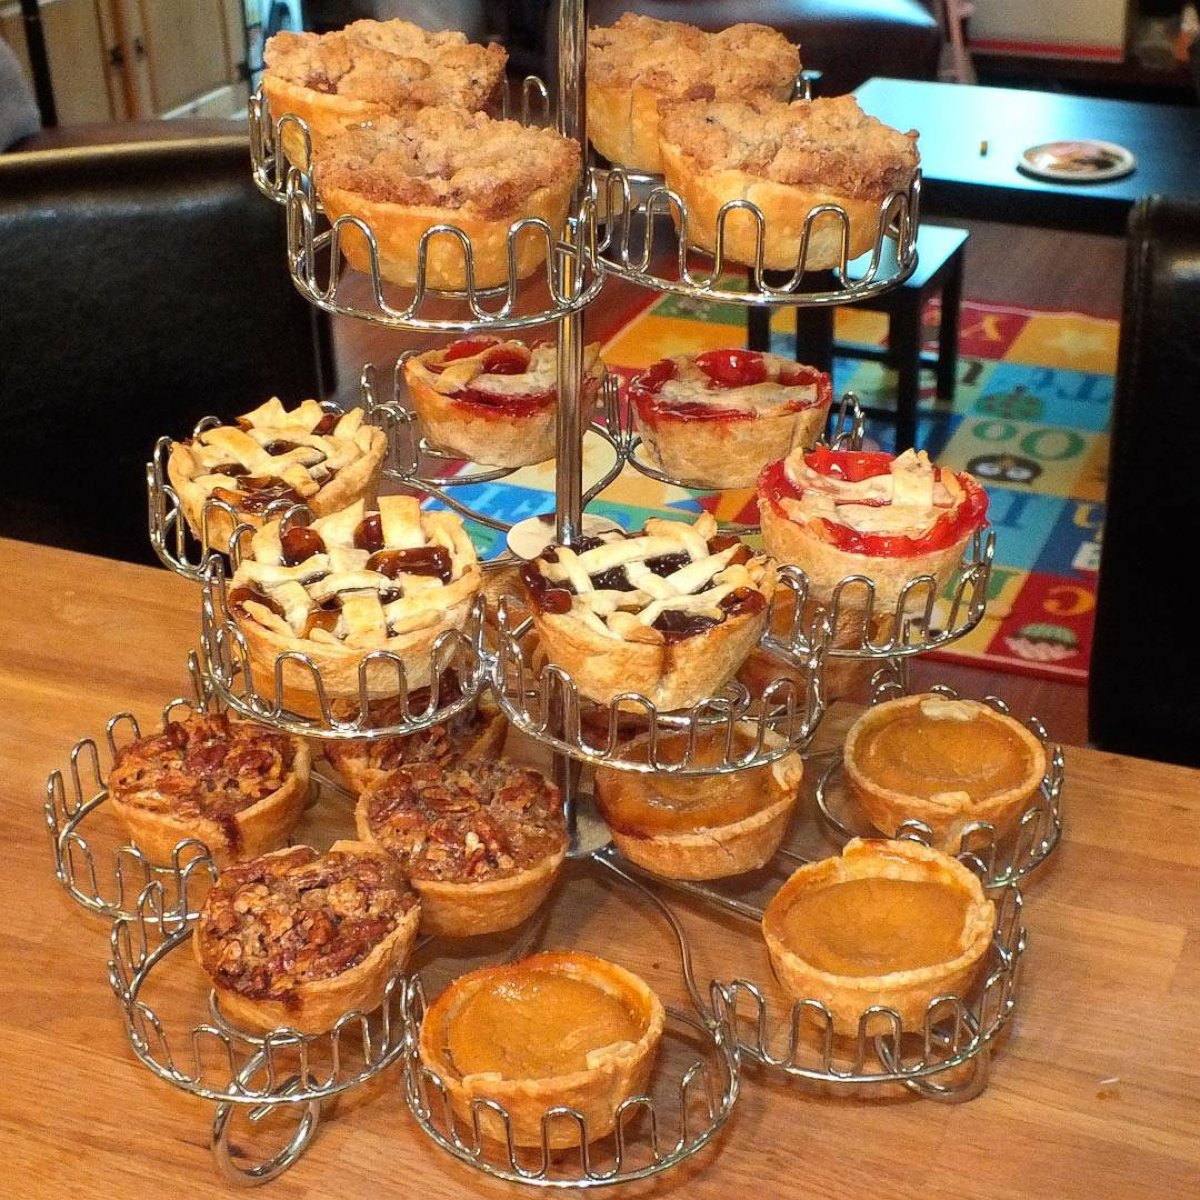 PHOTO: Small bites, like these mini pies from TwoSistersCrafting.com, are a popular idea for "Friendsgiving" celebrations.